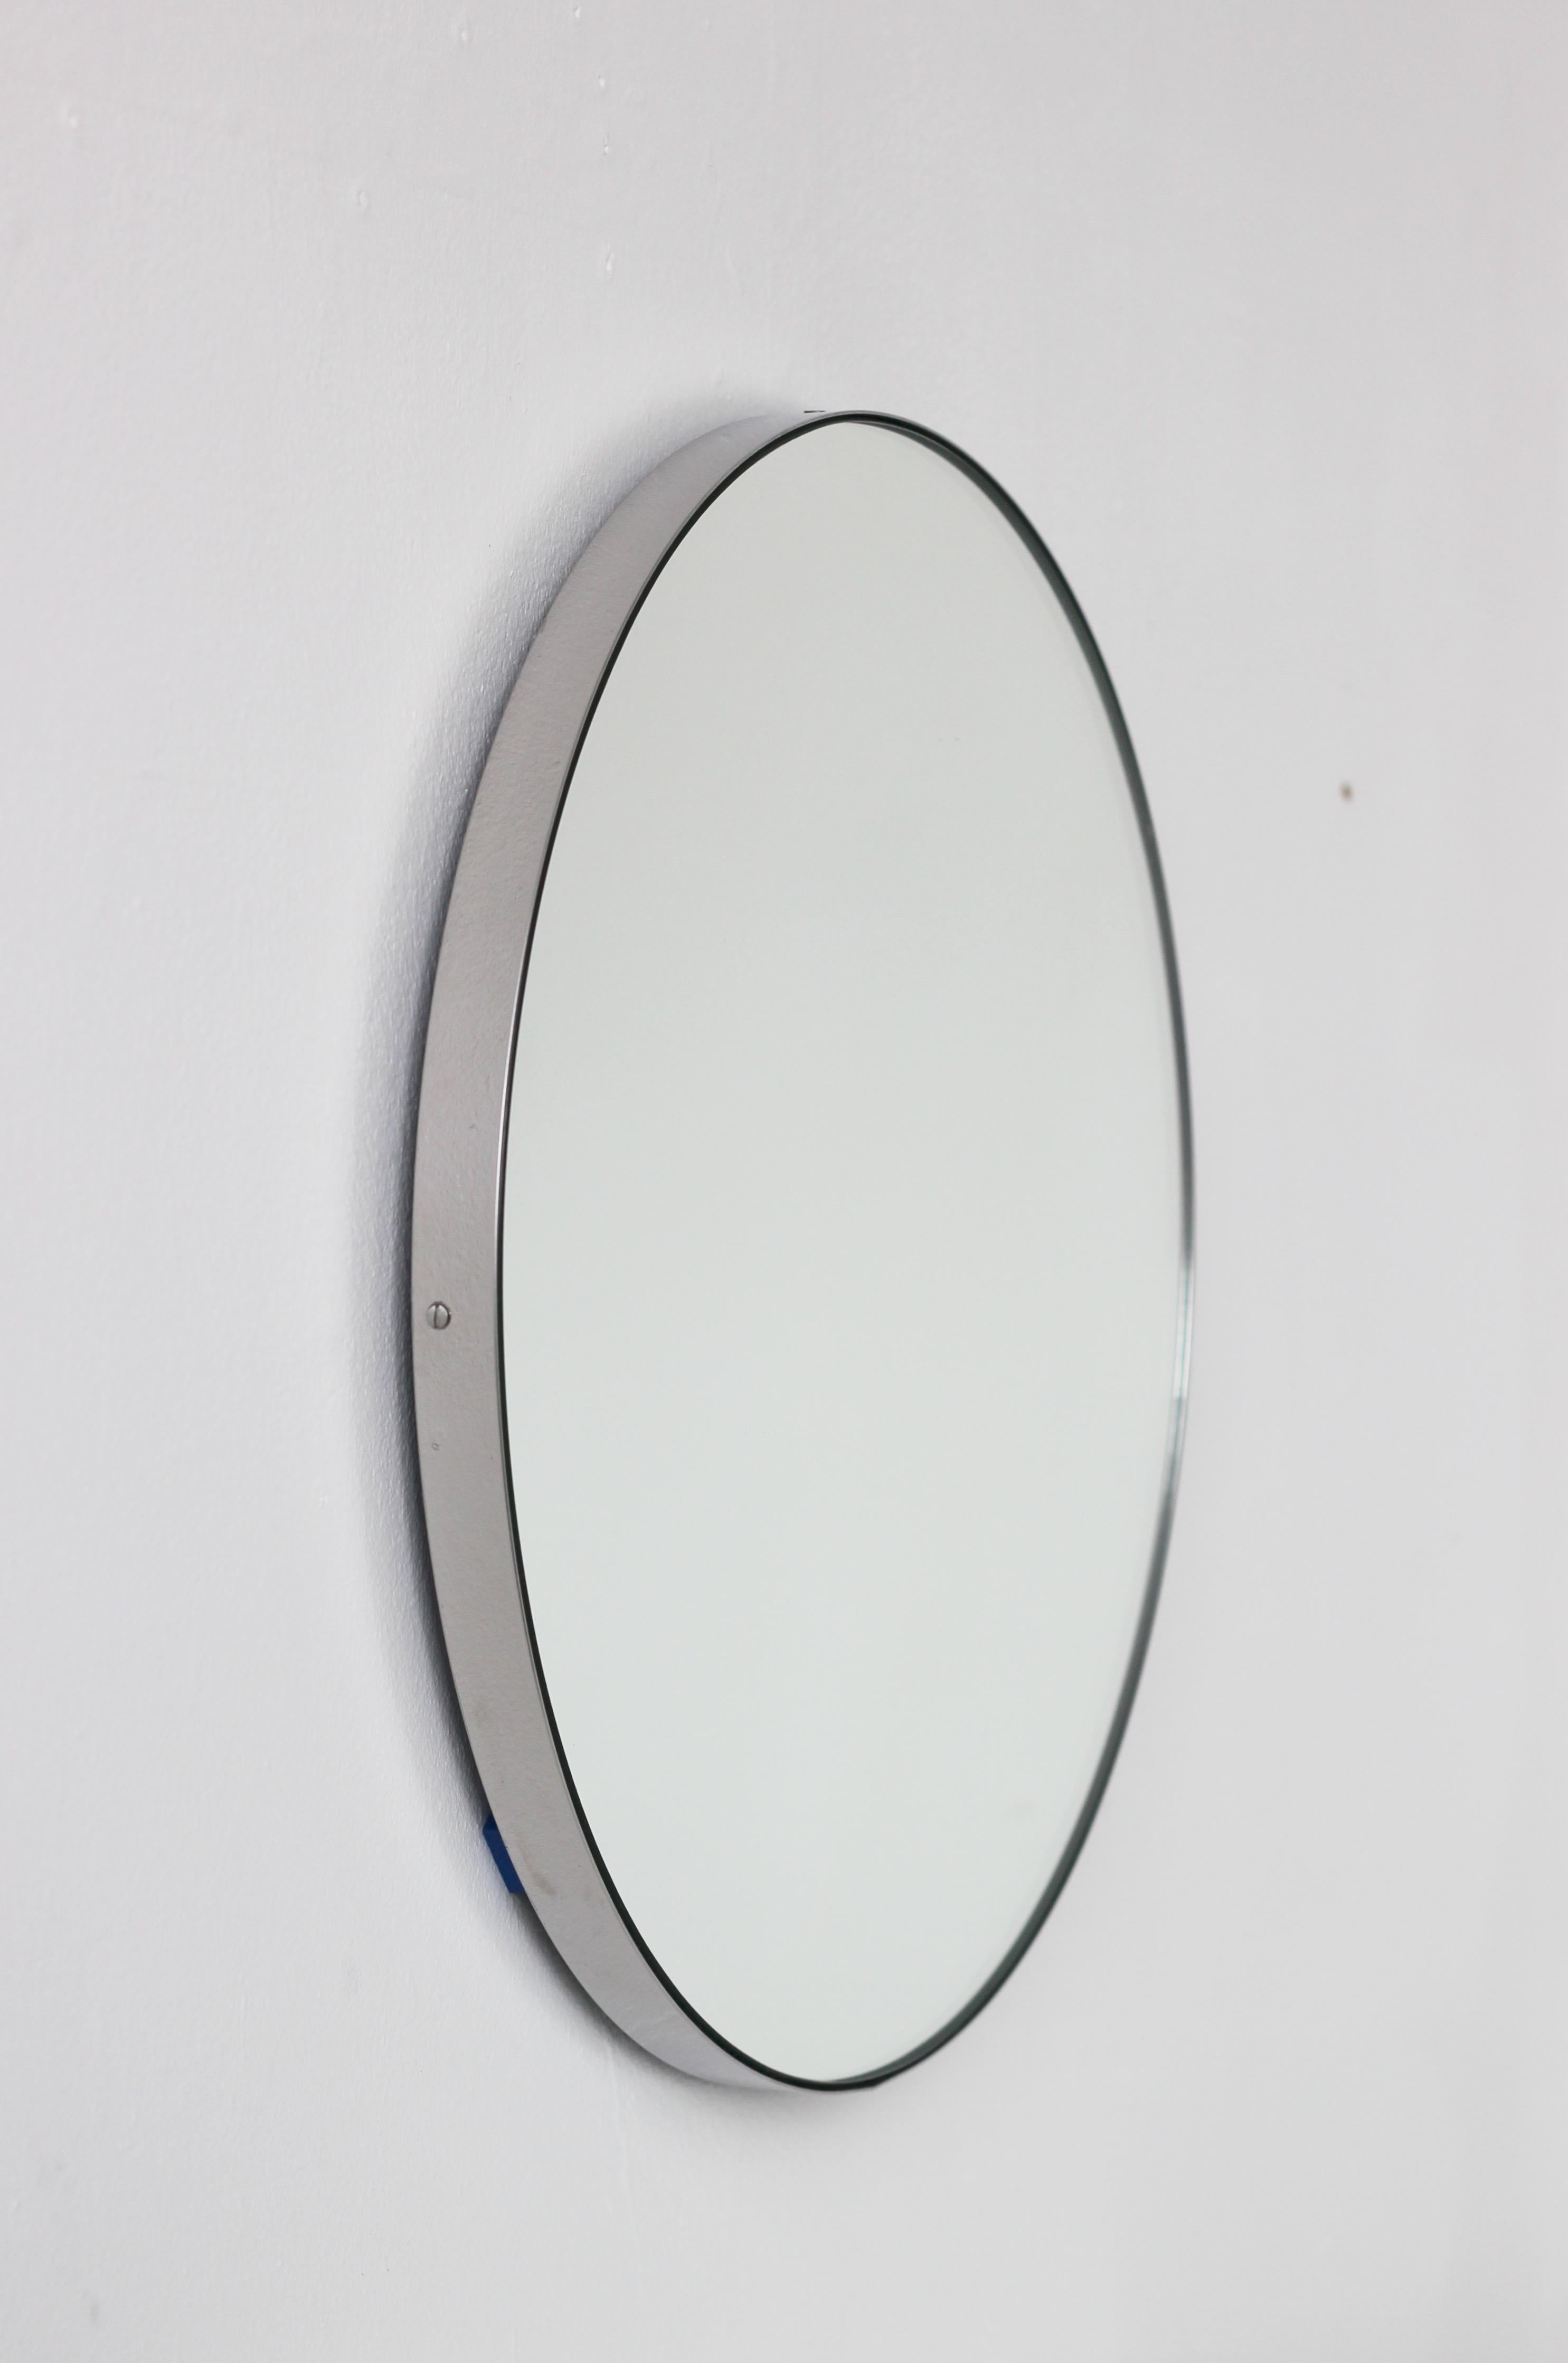 Minimalist round mirror with an elegant brushed stainless steel frame (also available in a polished finish). The detailing and finish, including visible screws, emphasise the crafty and quality feel of the mirror, a true signature of our brand.